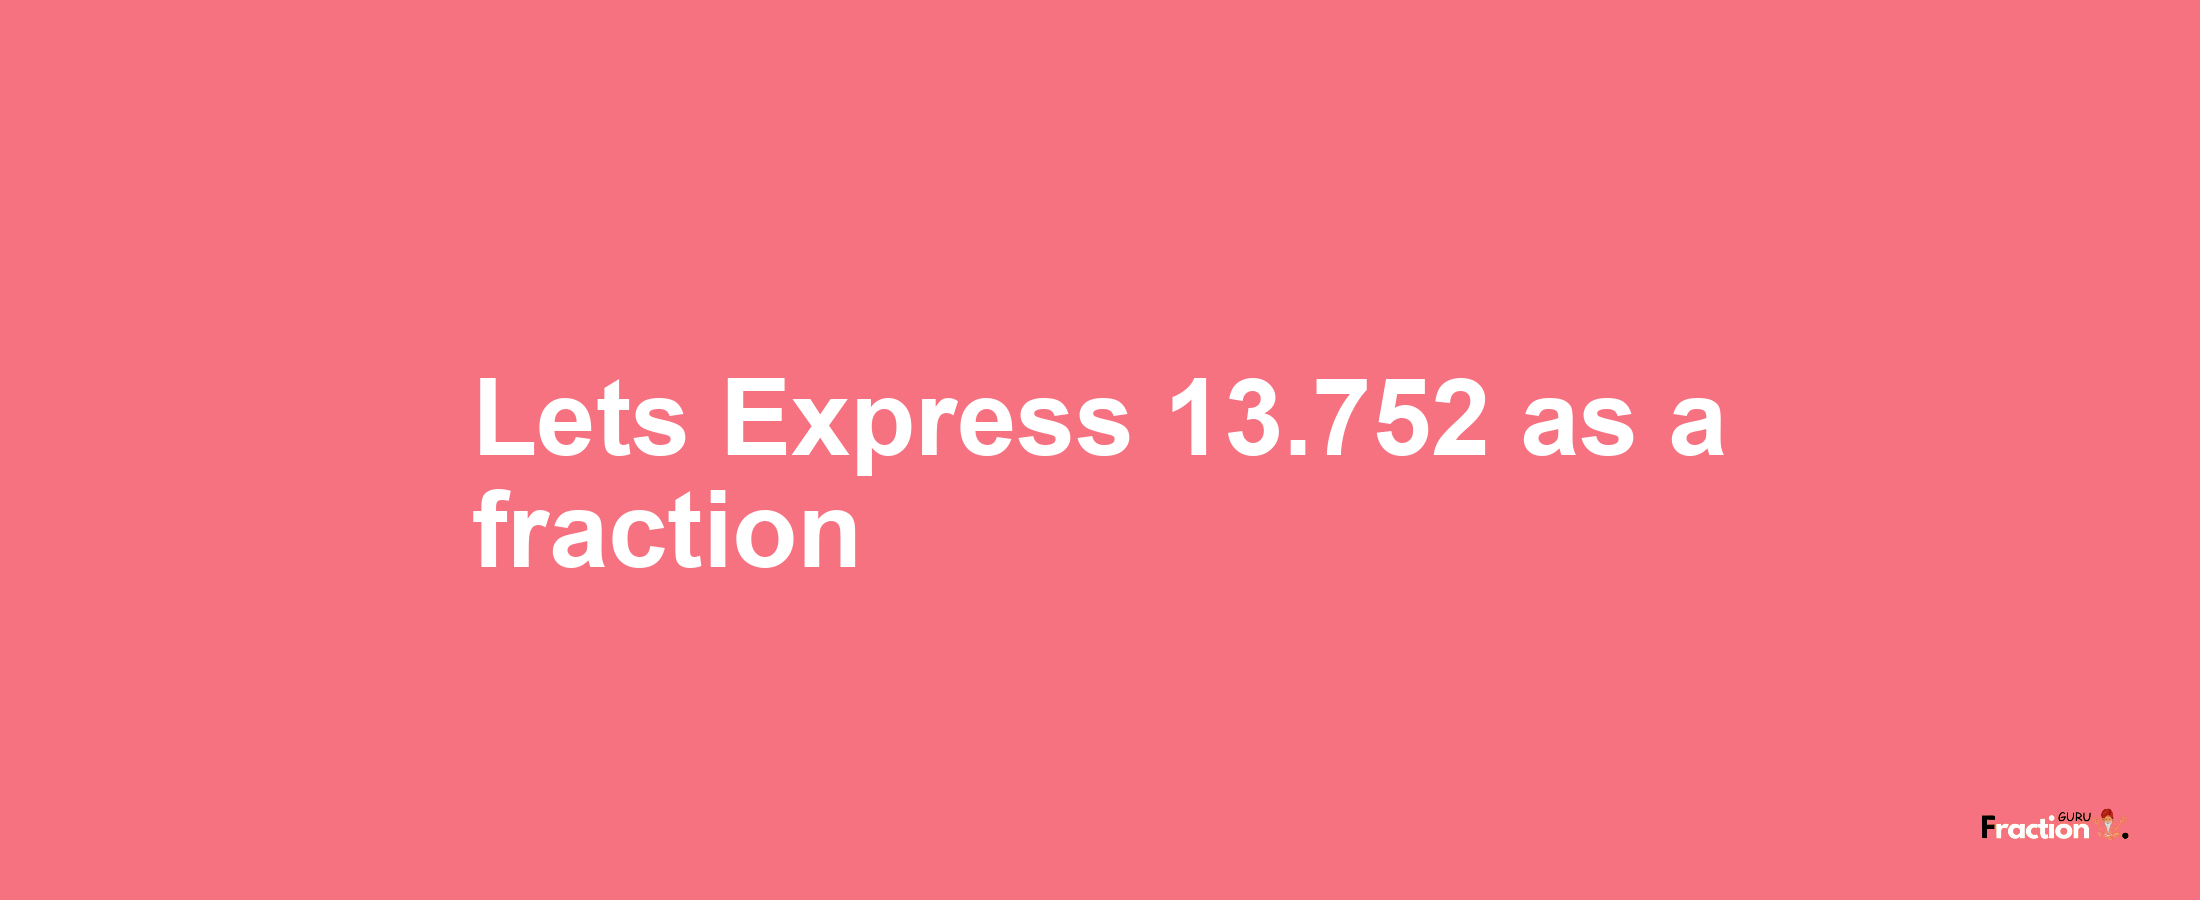 Lets Express 13.752 as afraction